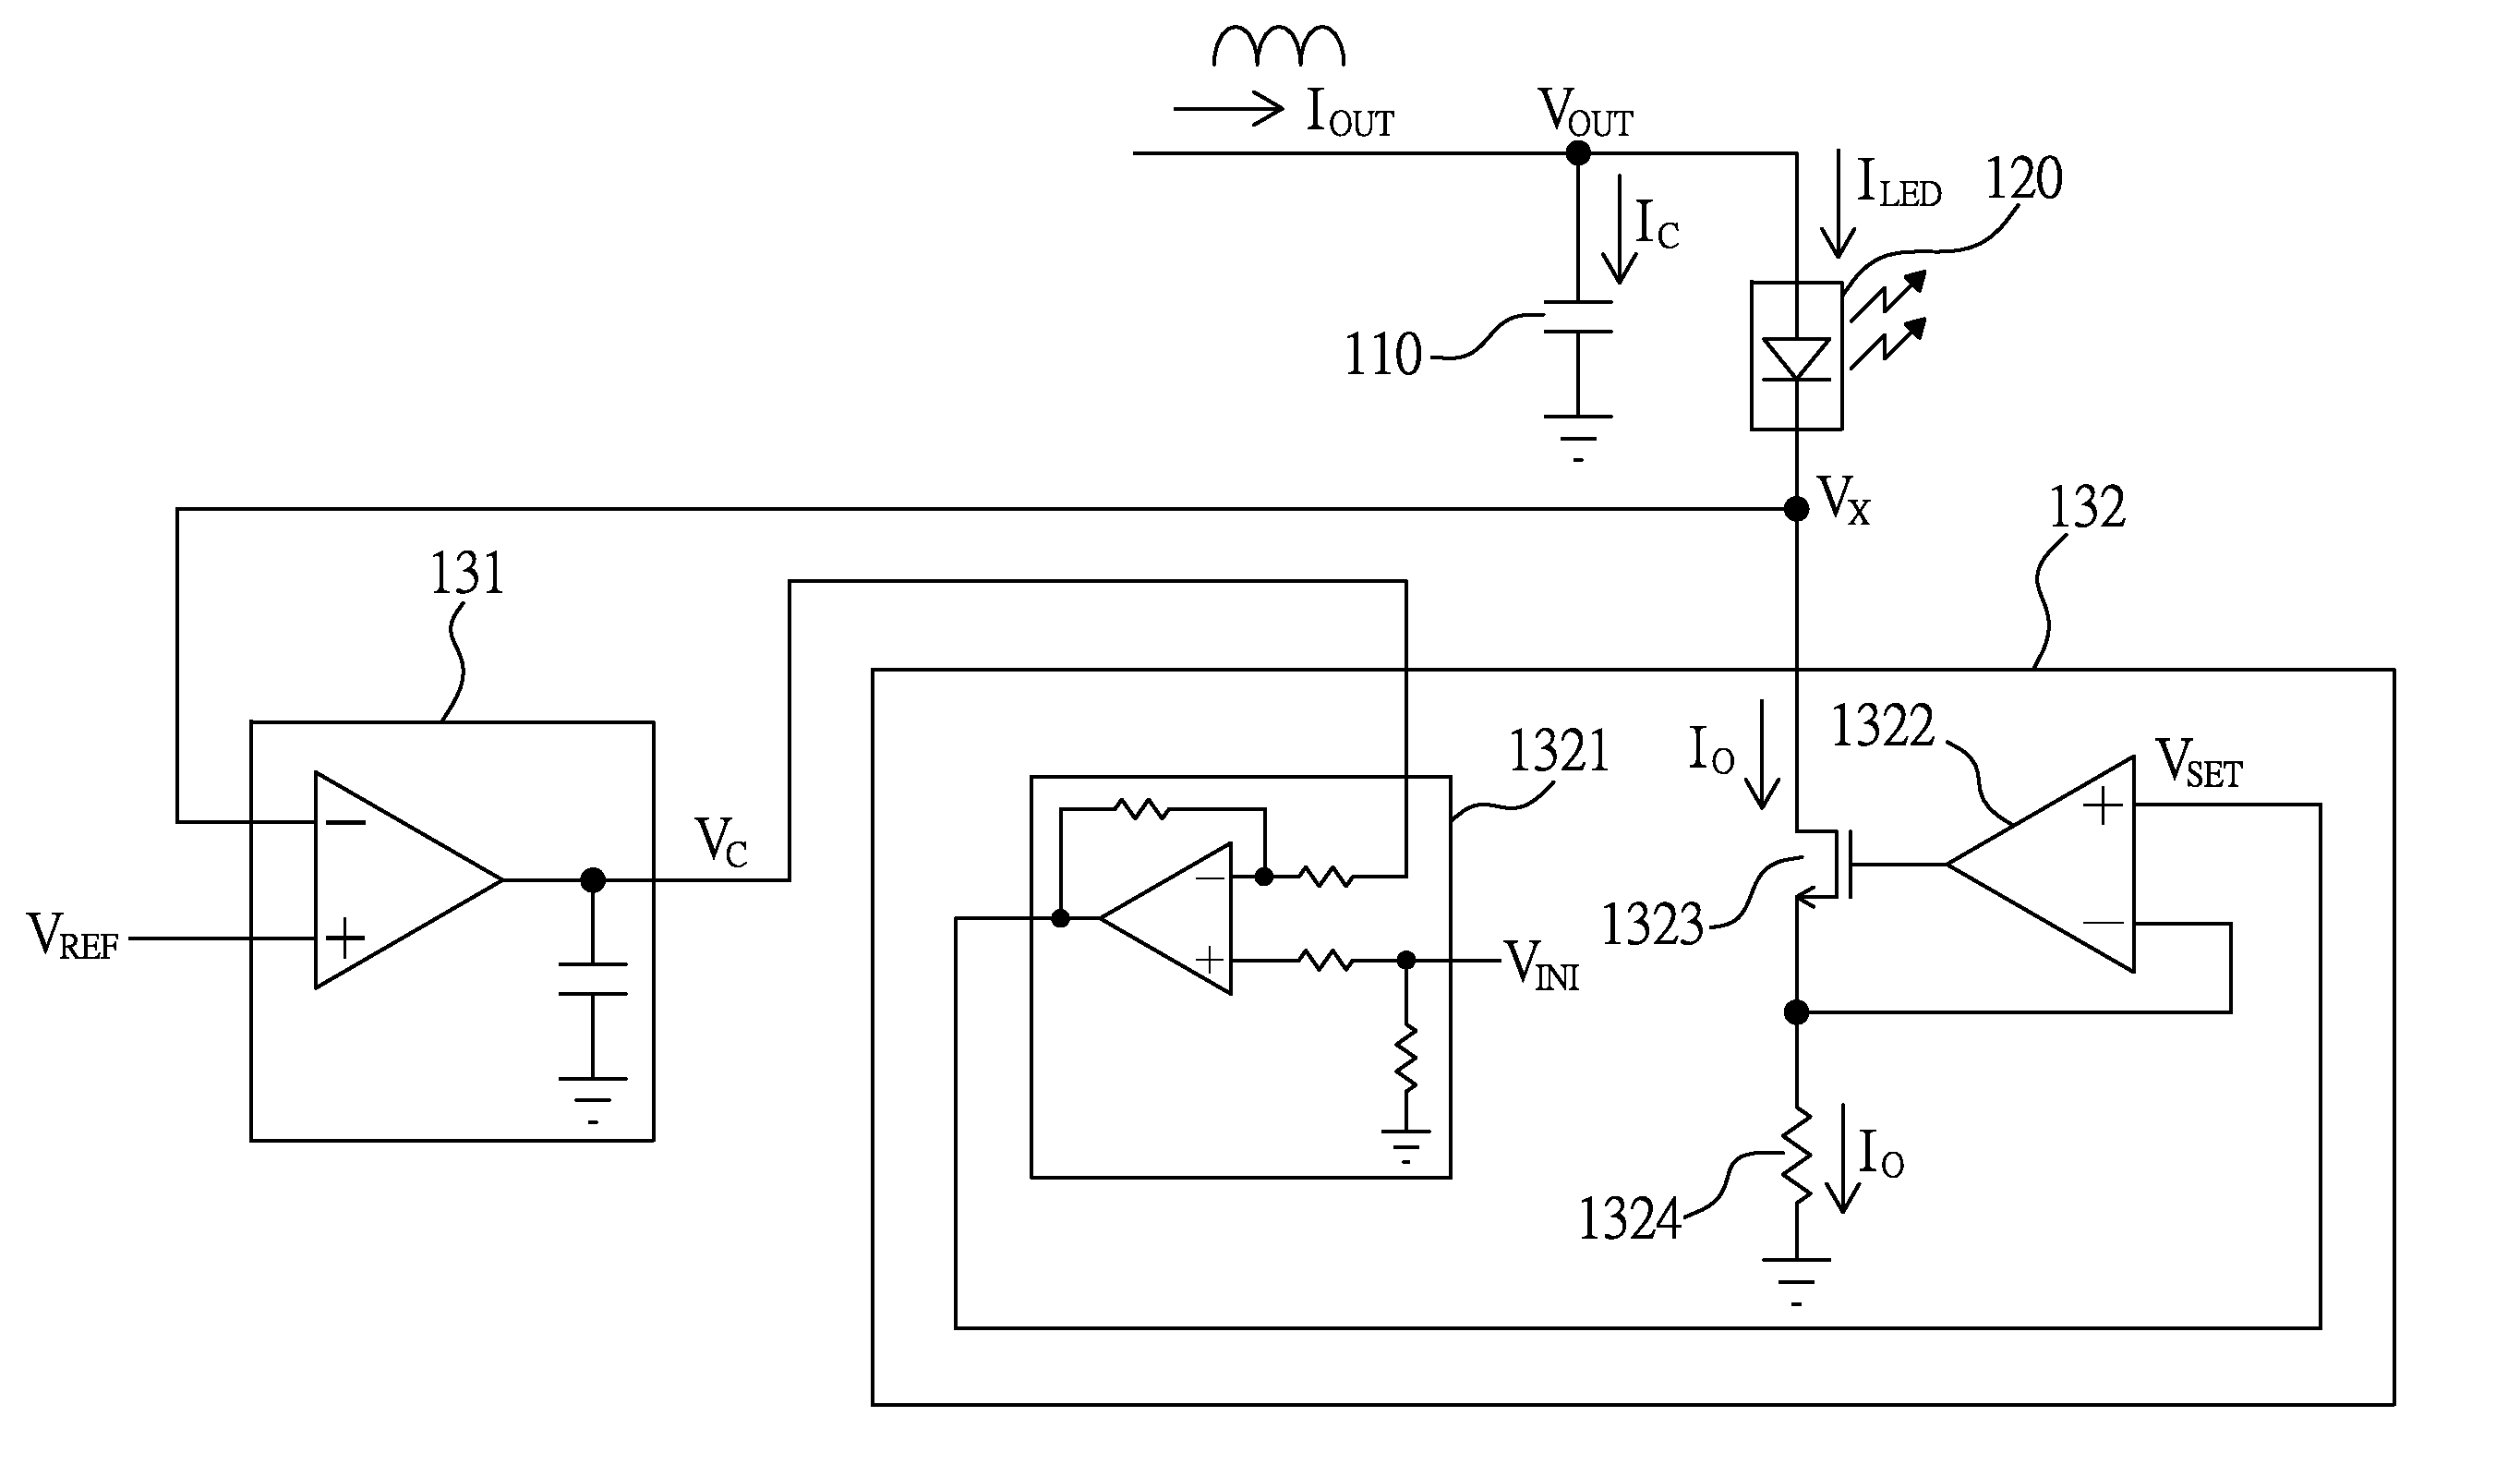 Method for minimizing LED flicker of an LED driver system